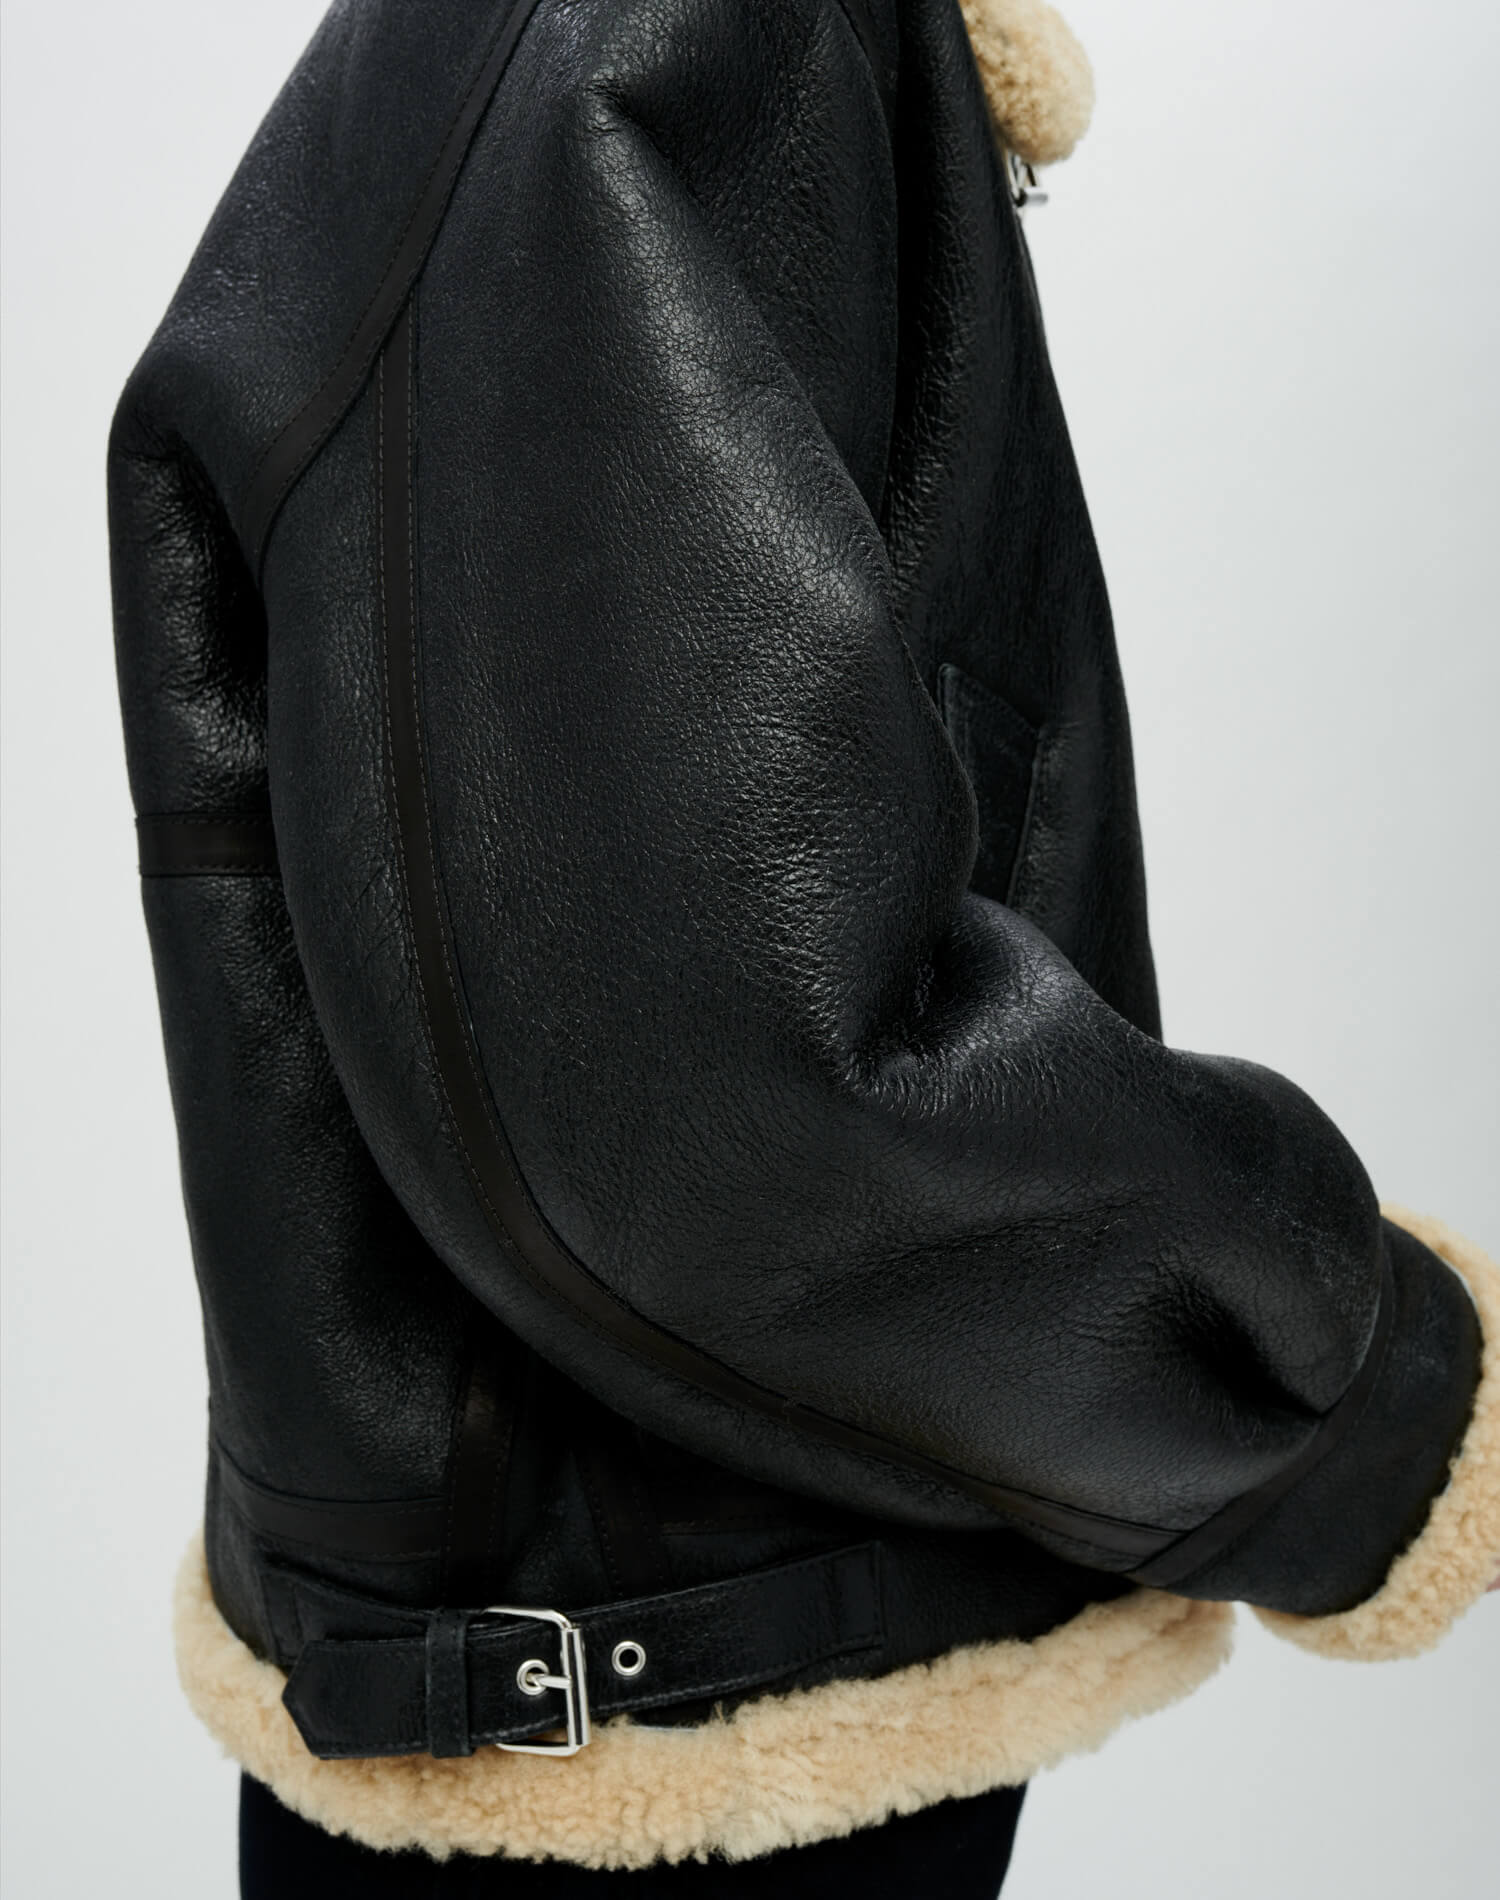 Suede Shearling Aviator Jacket - Black Leather